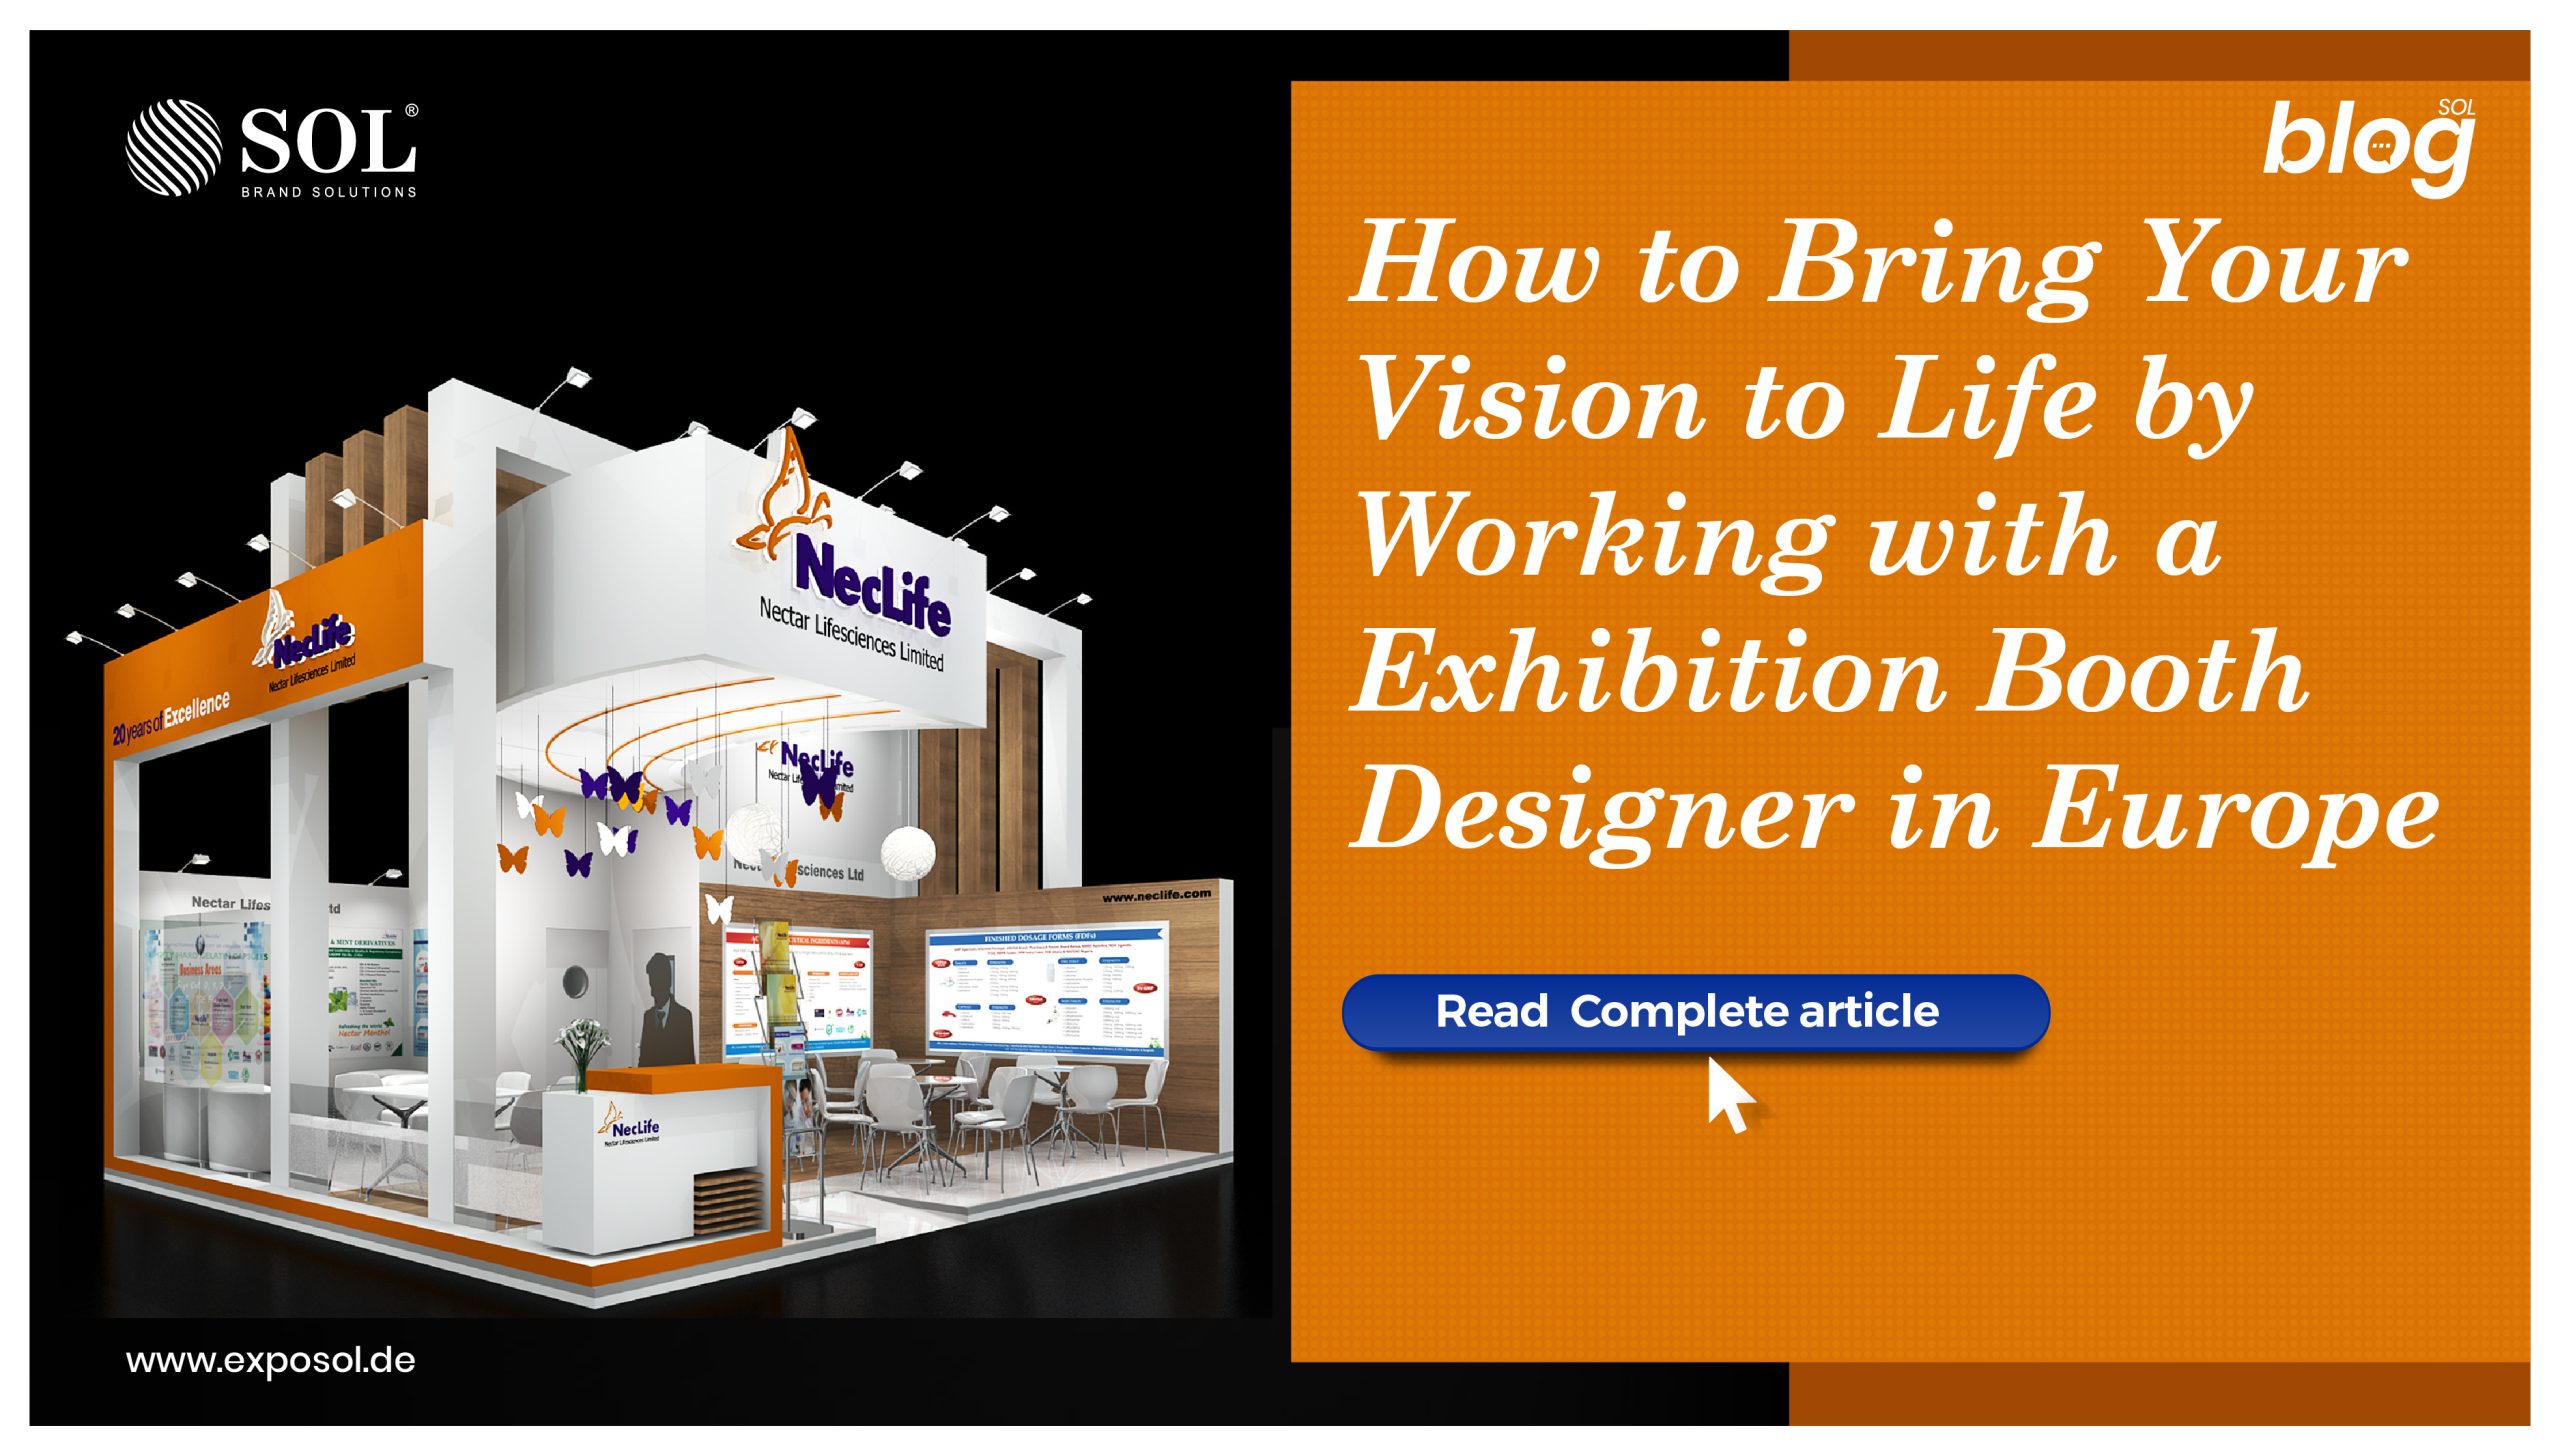 Stand Out at Expos and Exhibitions with Eye-Catching & Creative Exhibition Stands in Germany